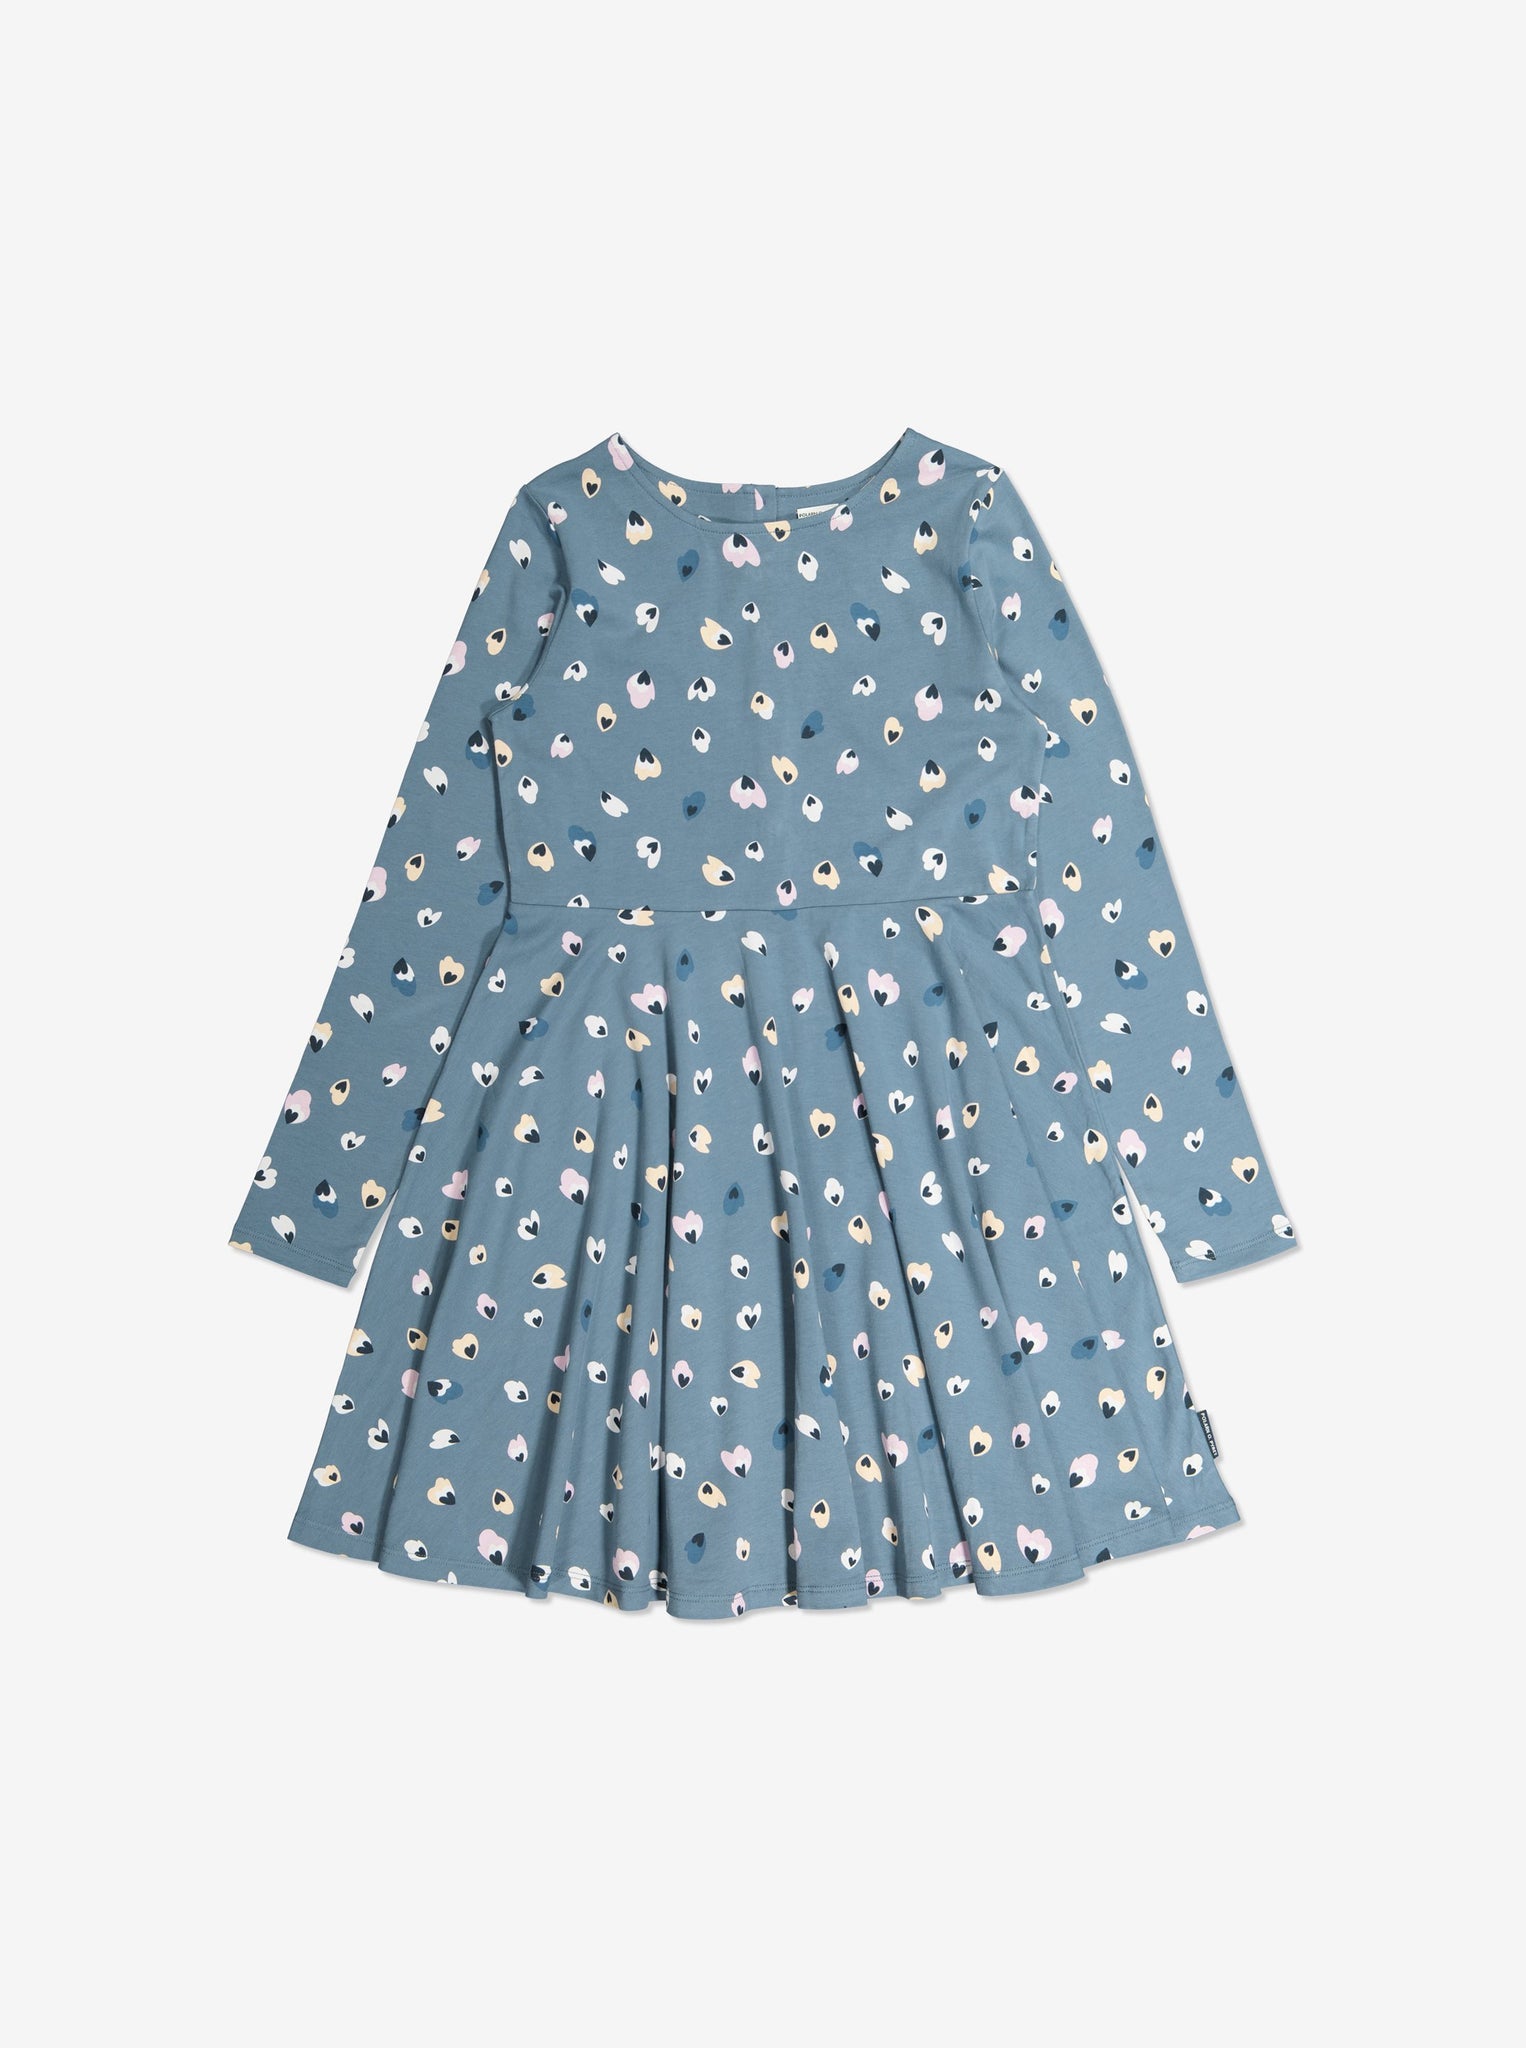   Blue Heart Print Girls Dress from Polarn O. Pyret Kidswear. Made with organic cotton for comfortable fit.